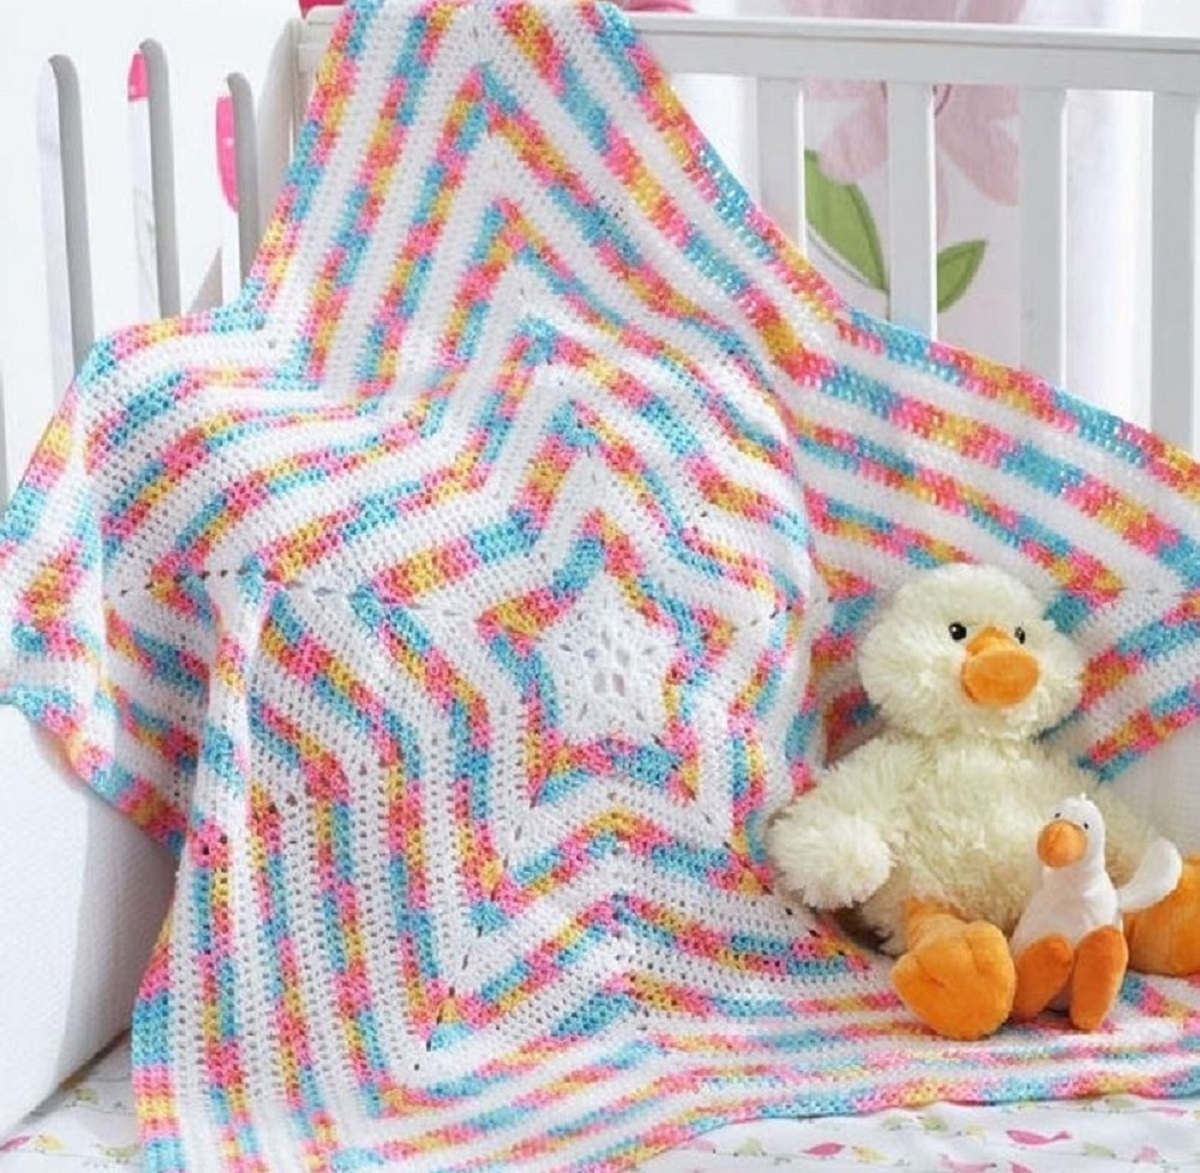 Large pink, blue, and white star shaped blanket with stars decreasing in size as they get closer to the center with a toy duck next to it.